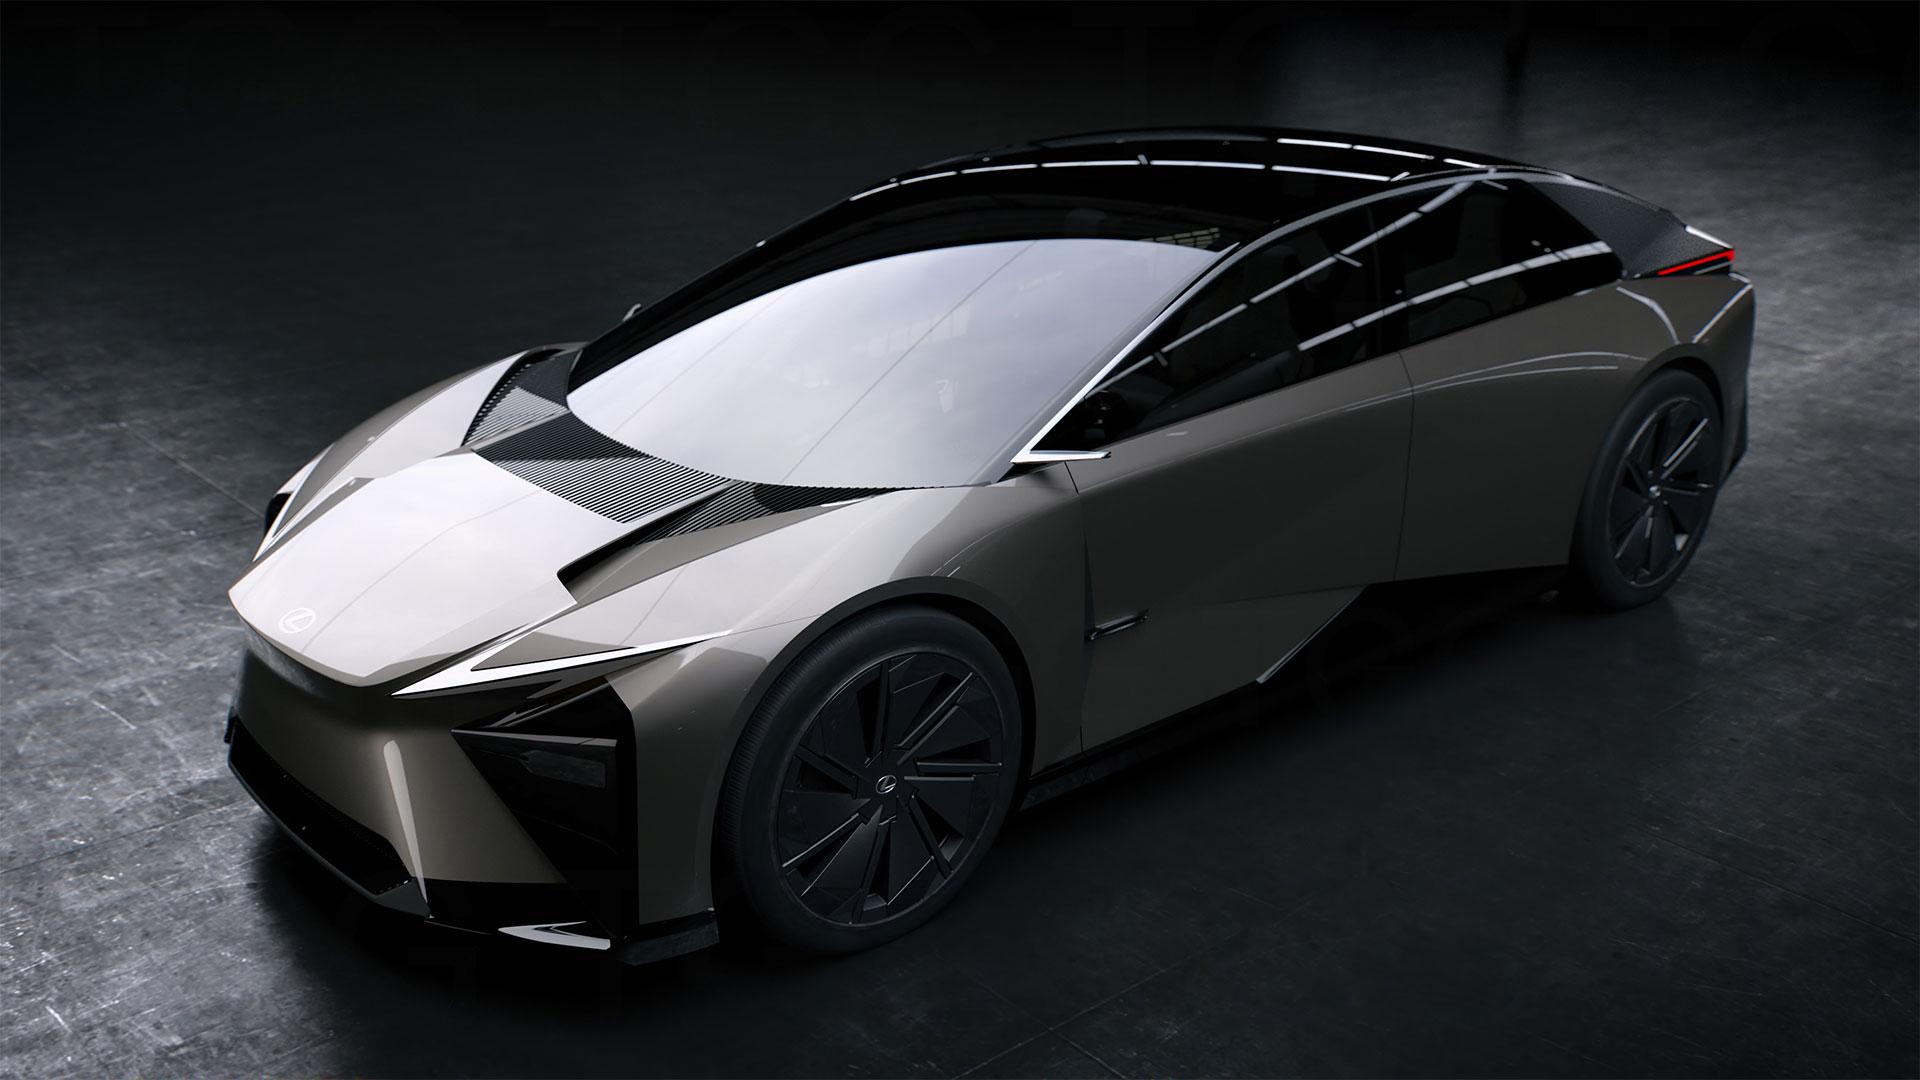 The Lexus LF-ZC Concept vehicle. Not available for purchase.